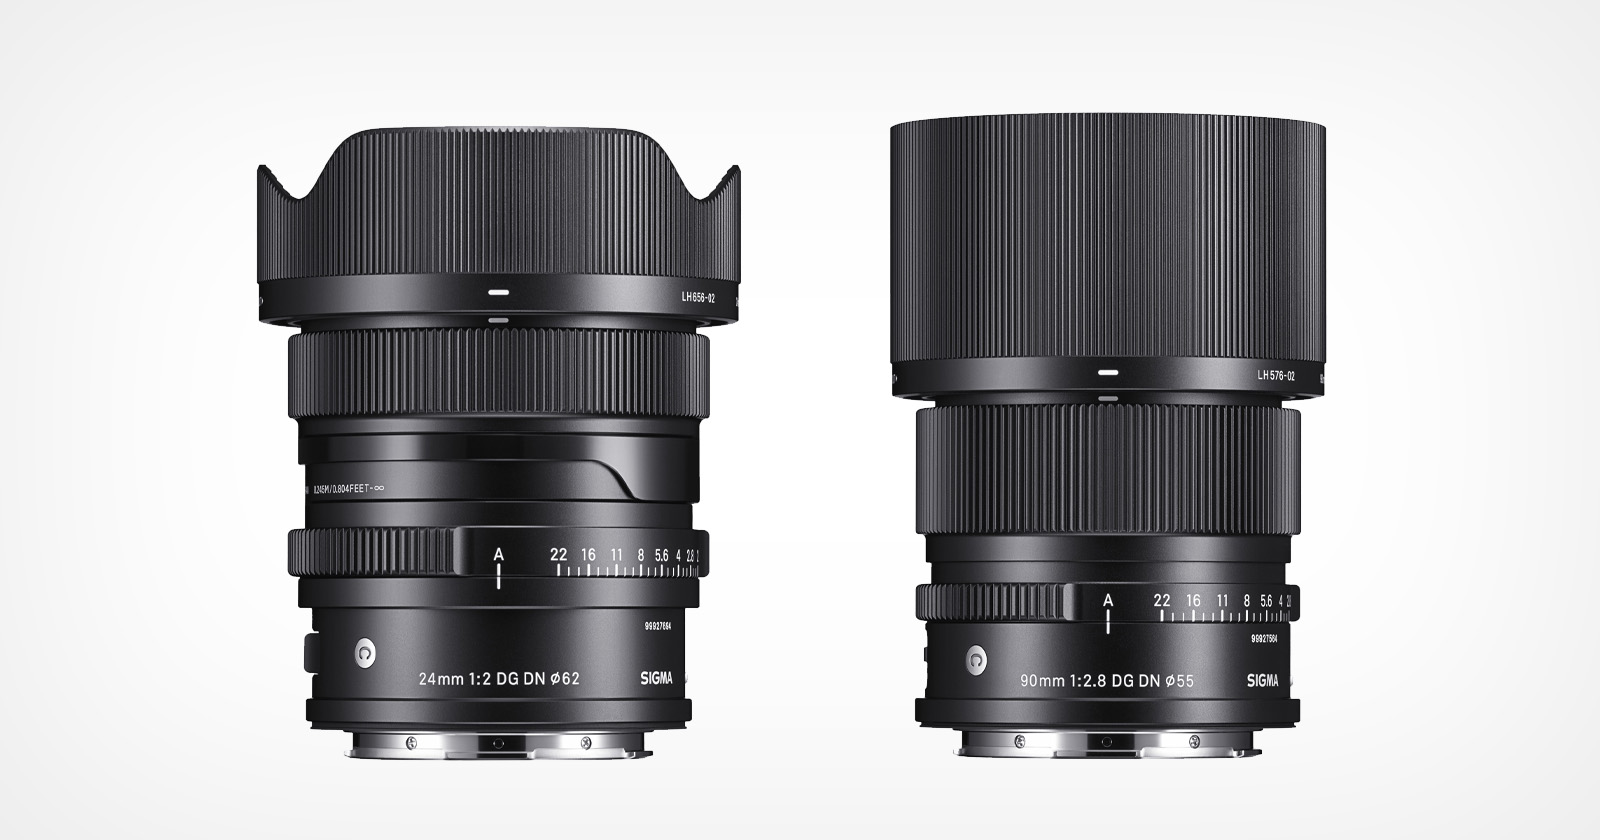 Sigma-Unveils-90mm-f2.8-and-24mm-f2-Primes-for-E-and-L-Mounts.jpg